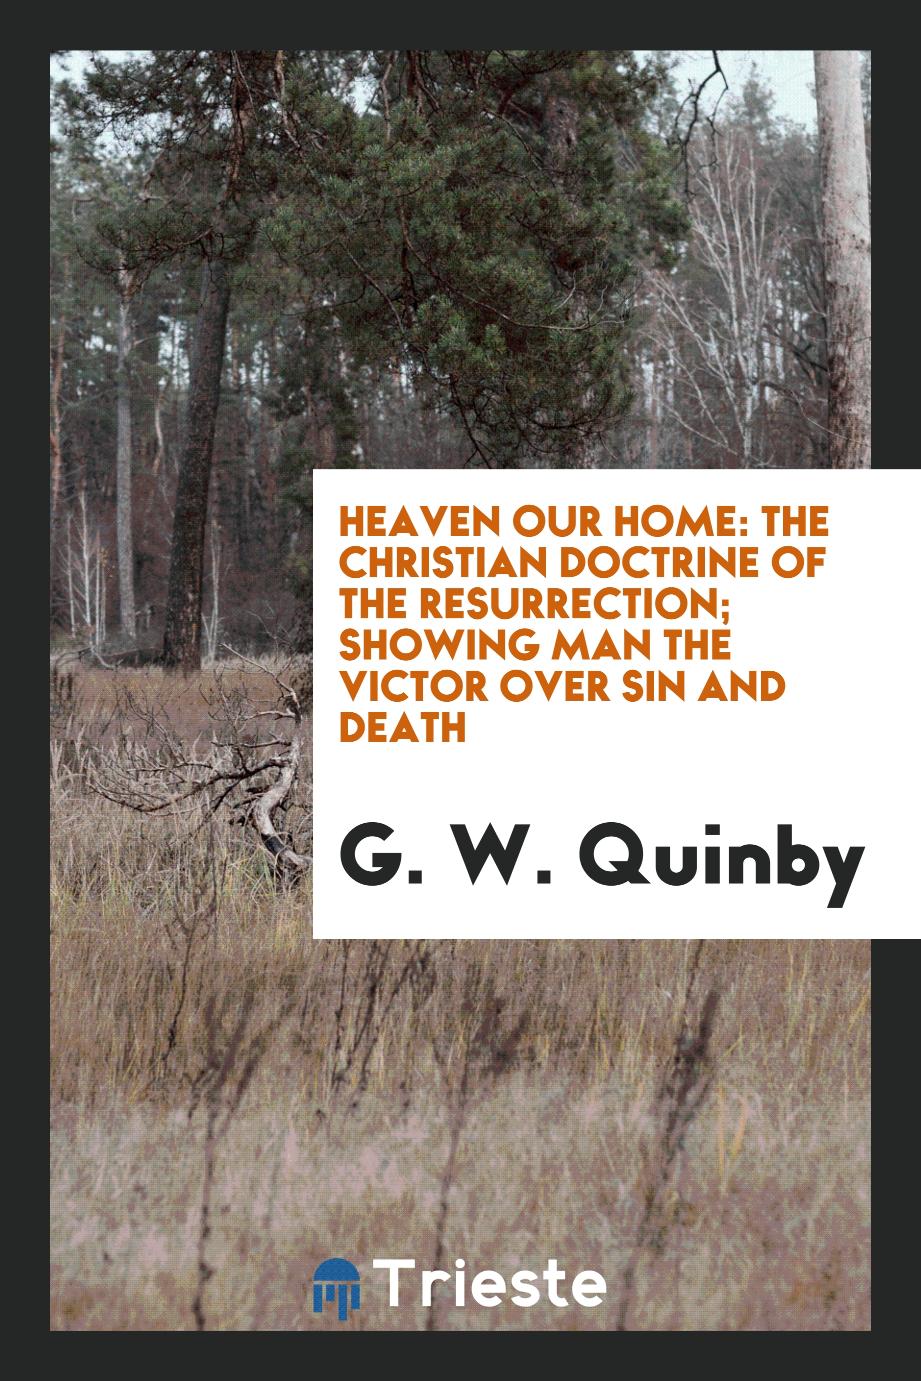 Heaven Our Home: The Christian Doctrine of the Resurrection; Showing Man the Victor Over Sin and Death